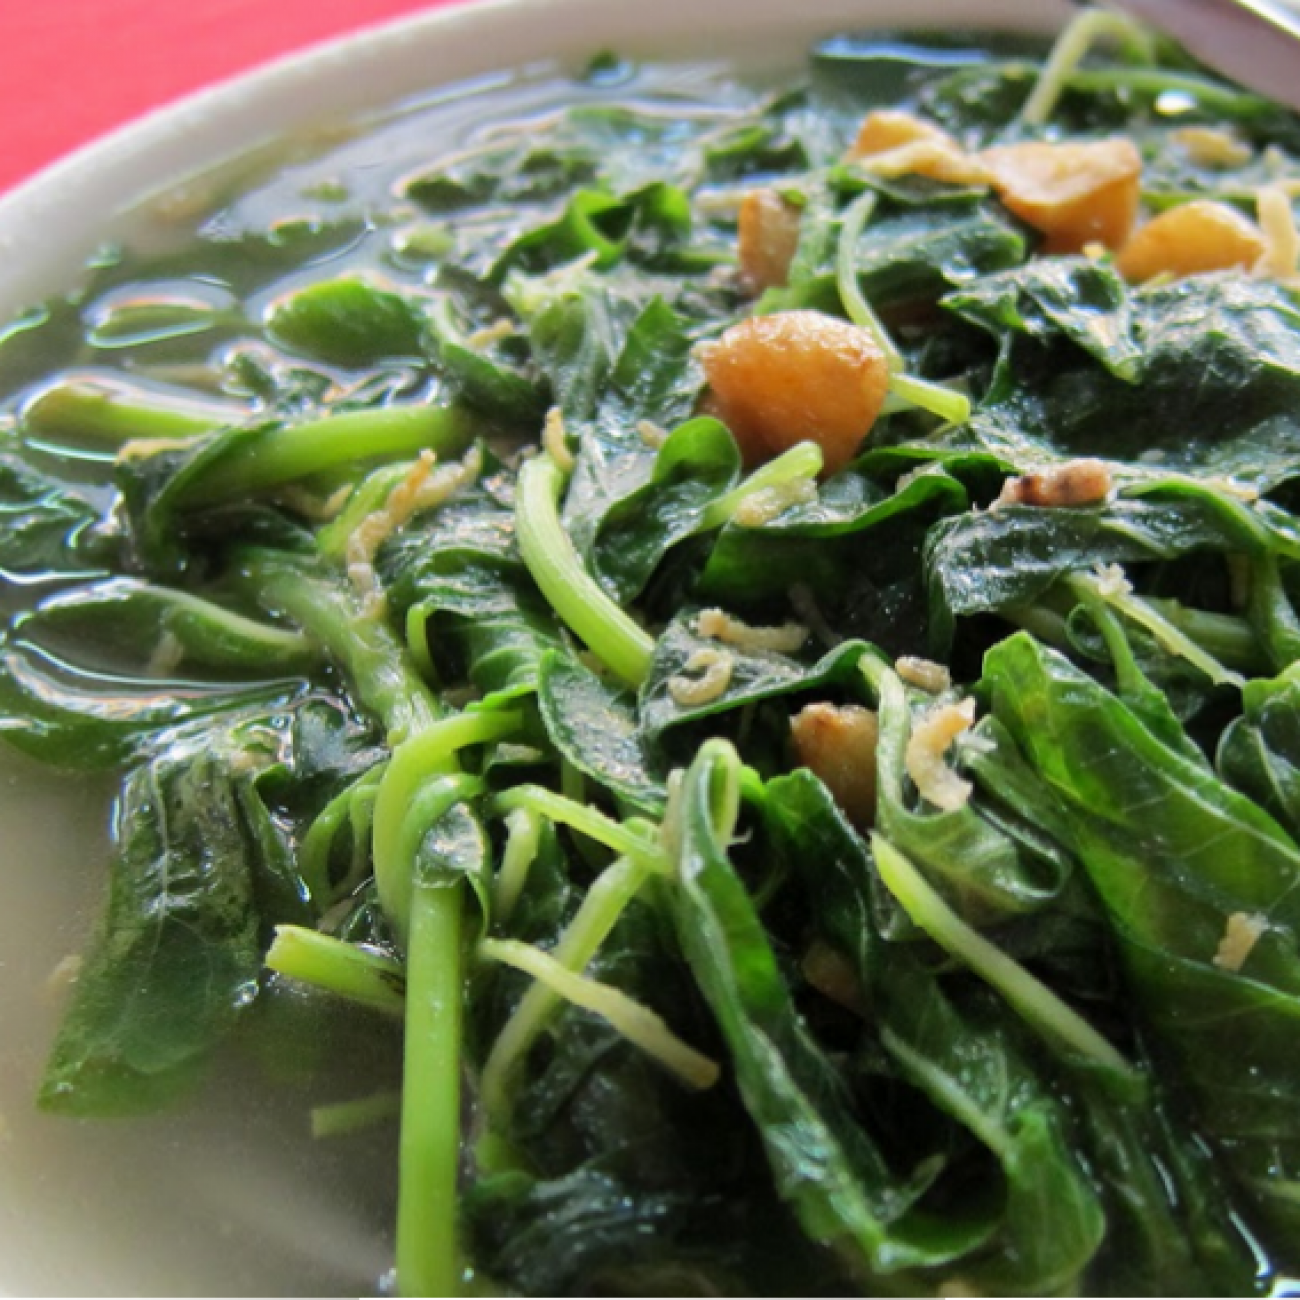 Spinach in Superior Broth (上汤菠菜)